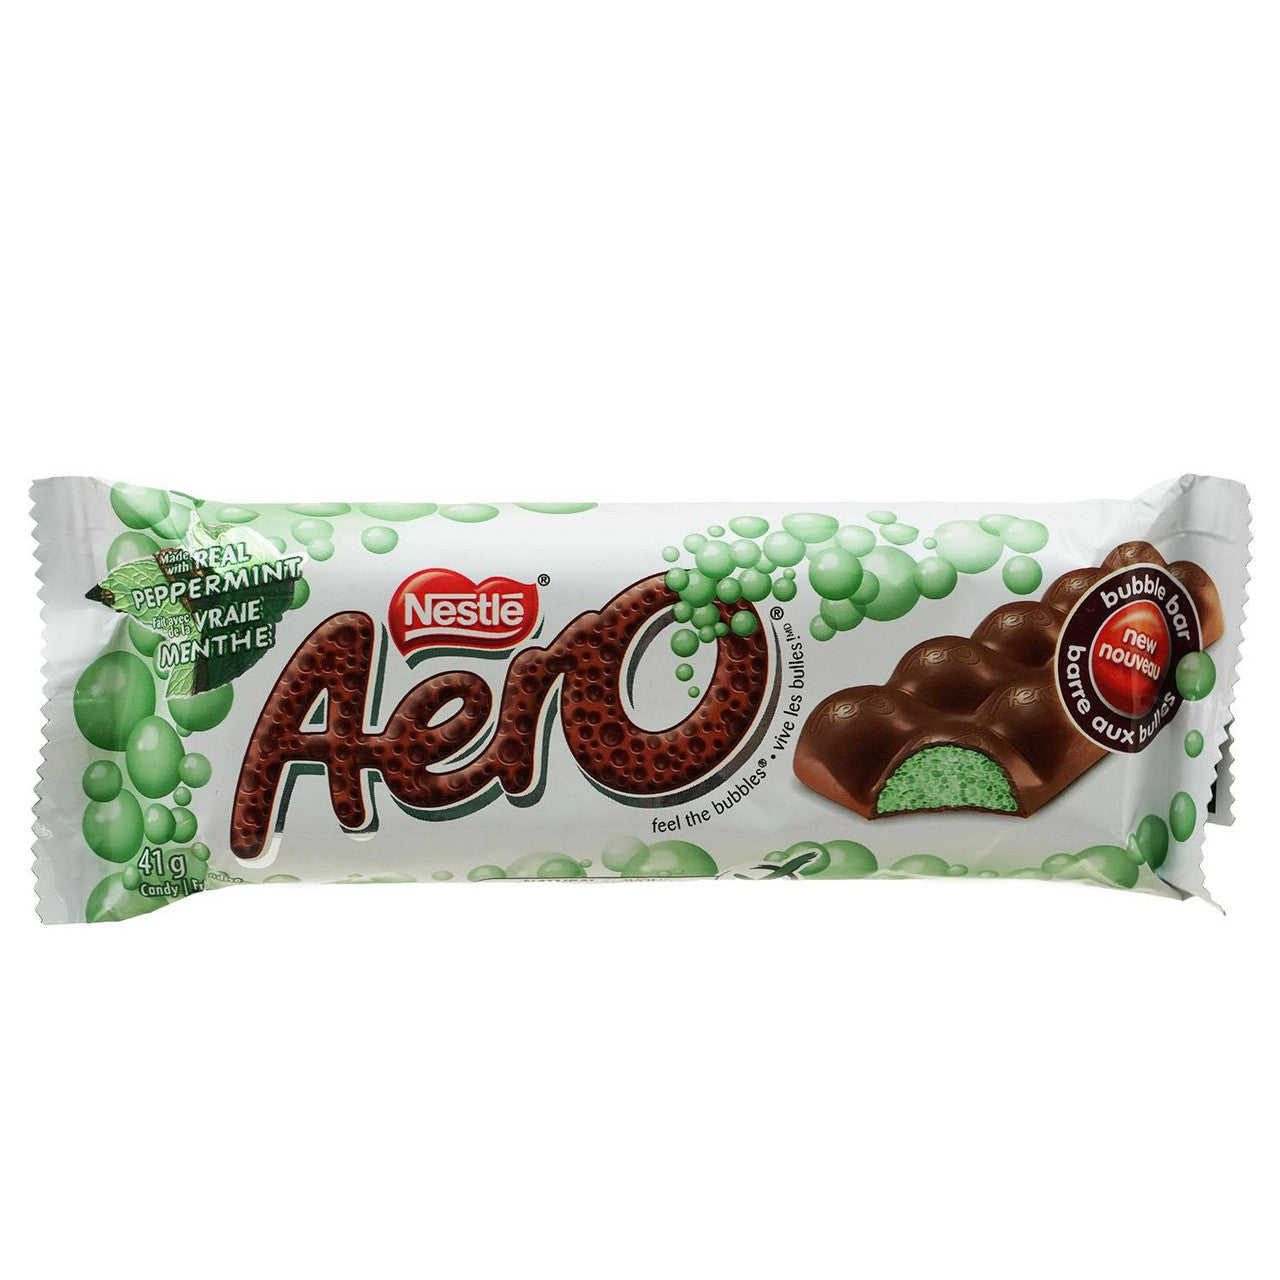 Nestle Aero Canadian Chocolate Mint Bar, 41g/1.4 oz., {Imported from Canada}